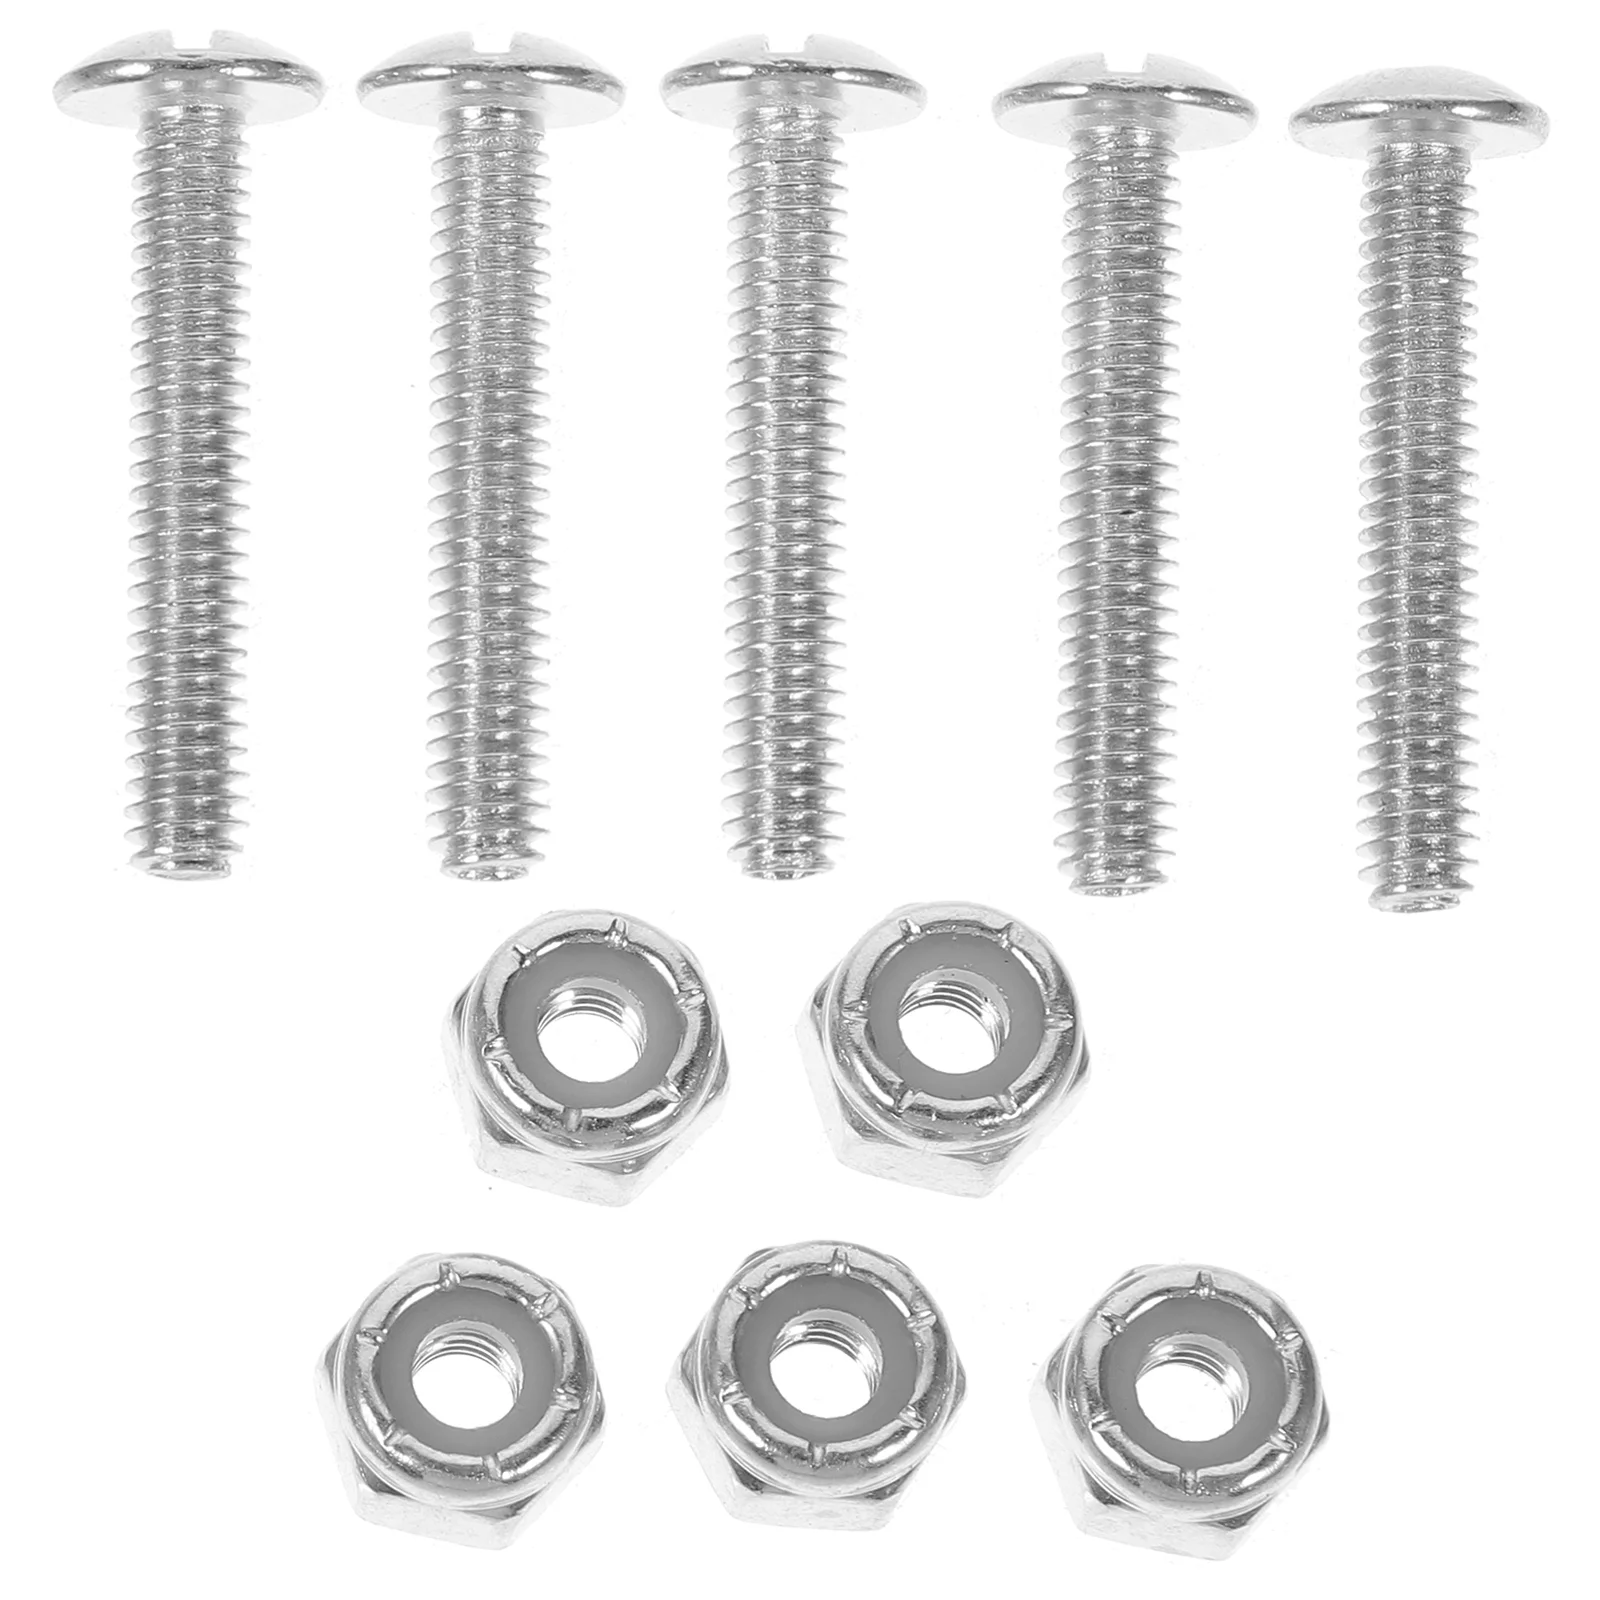 12 Pcs Table Football Screws Foosball Replacement Parts Nut Soccer Hardware Machine Nuts Galvanized Iron Accessories voron 0 2 full set of fasteners 10% extra hardware kit screws nuts diy project full kits for voron 0 2 printer